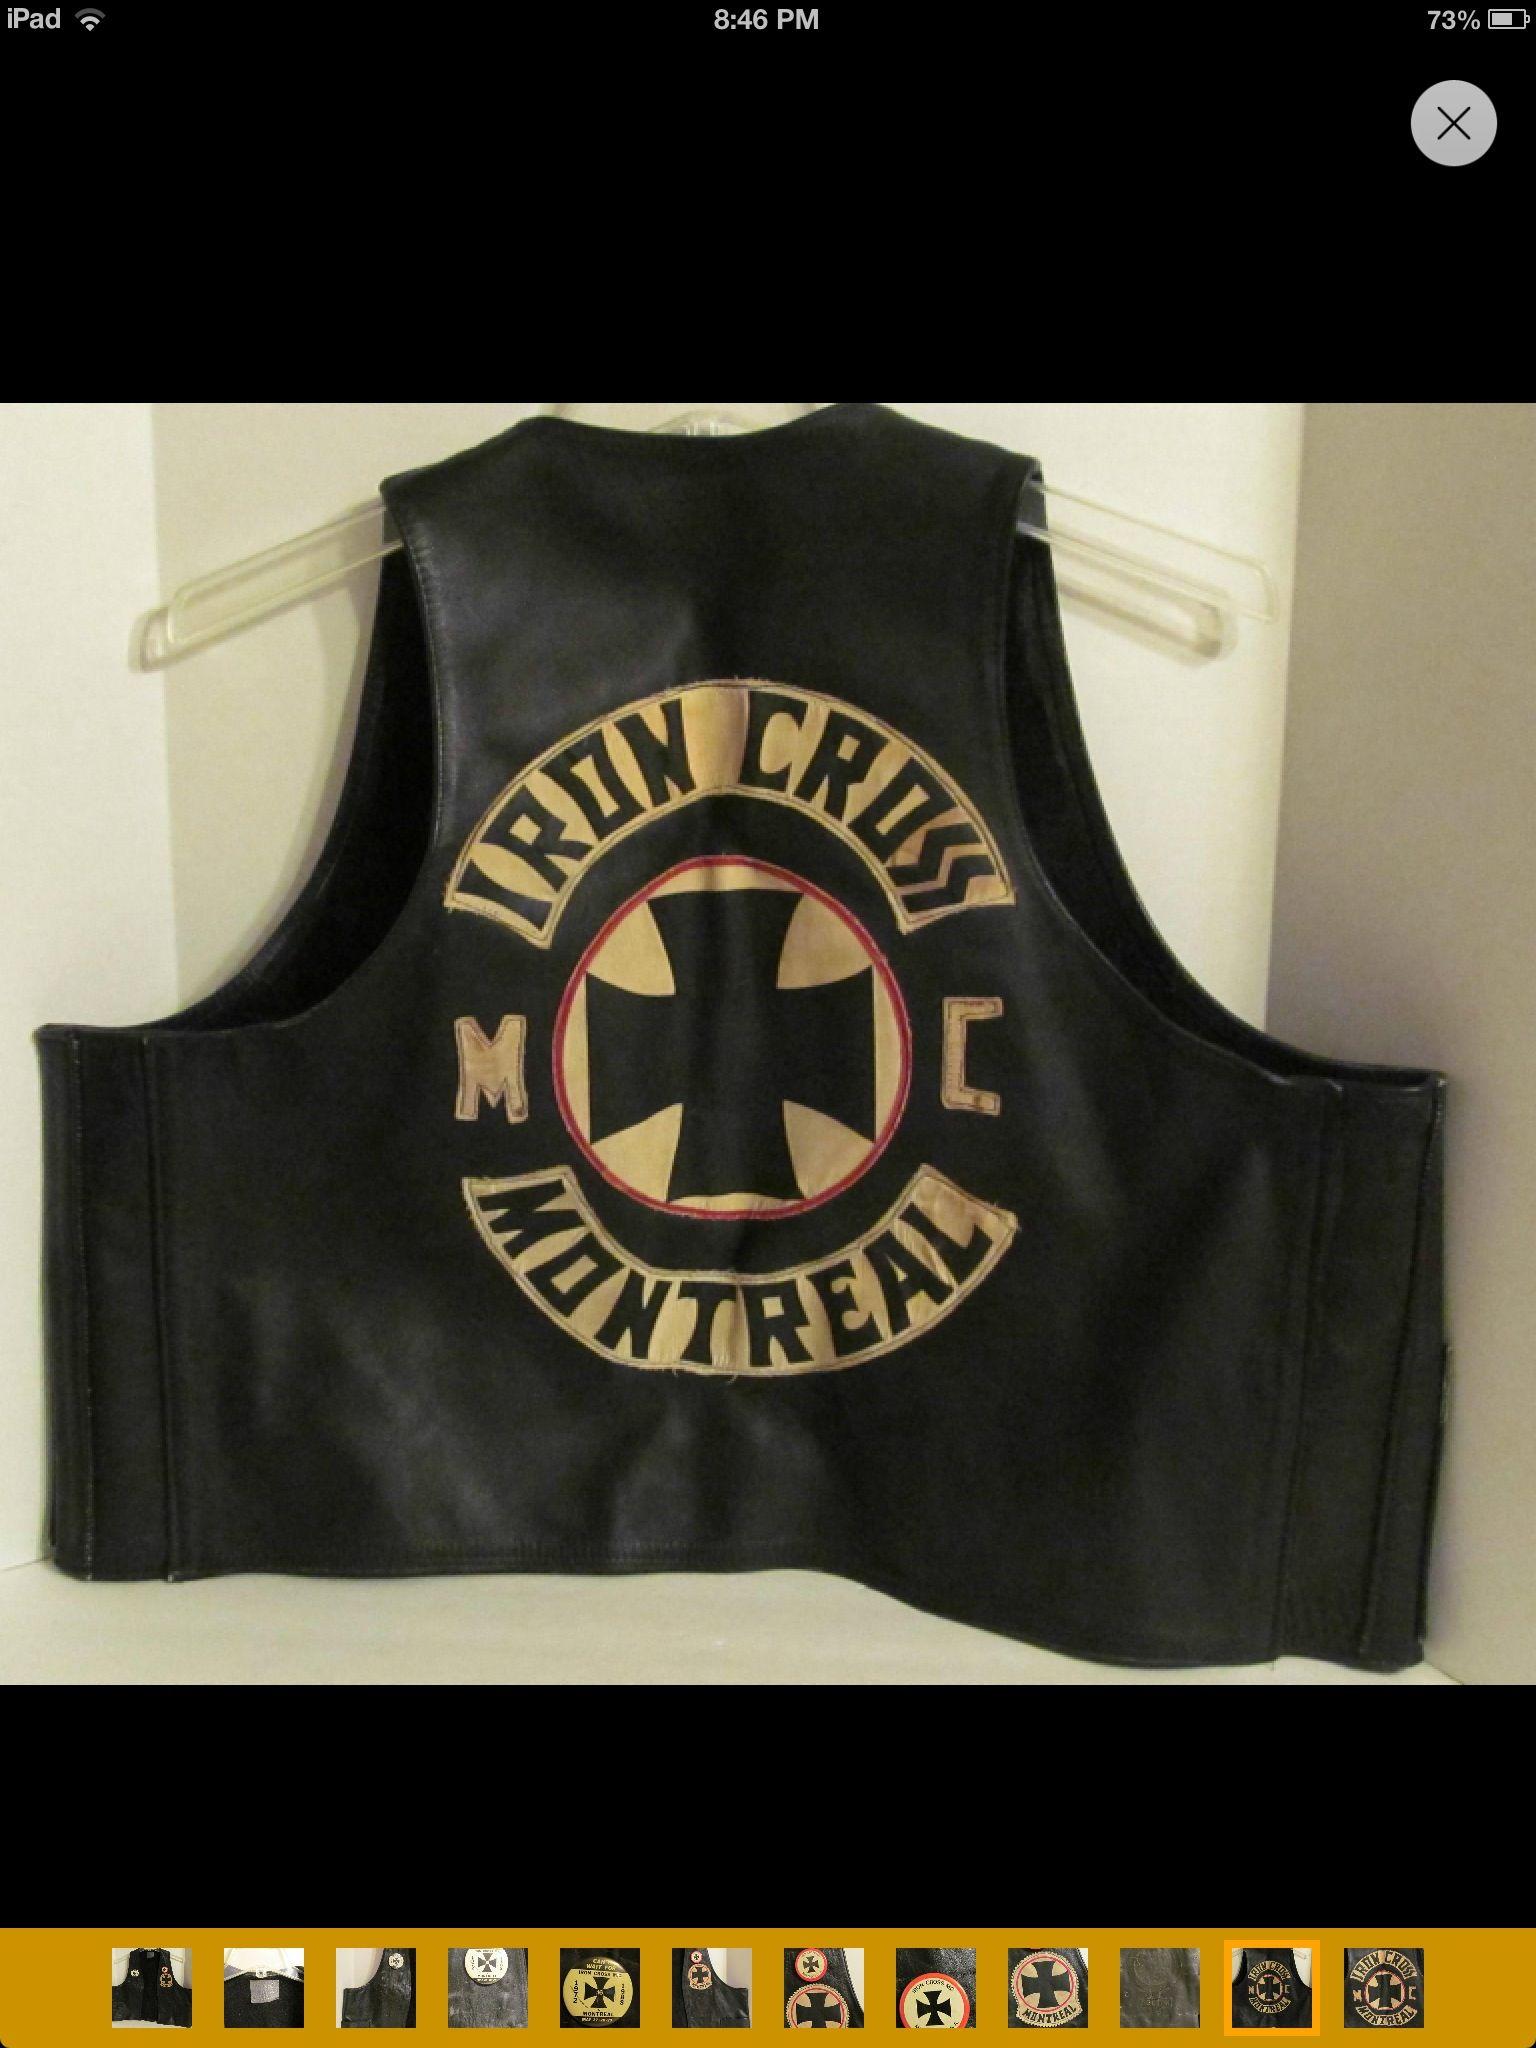 Well Known Cross Logo - The first outlaw motorcycle clubs, like the well known Hells Angels